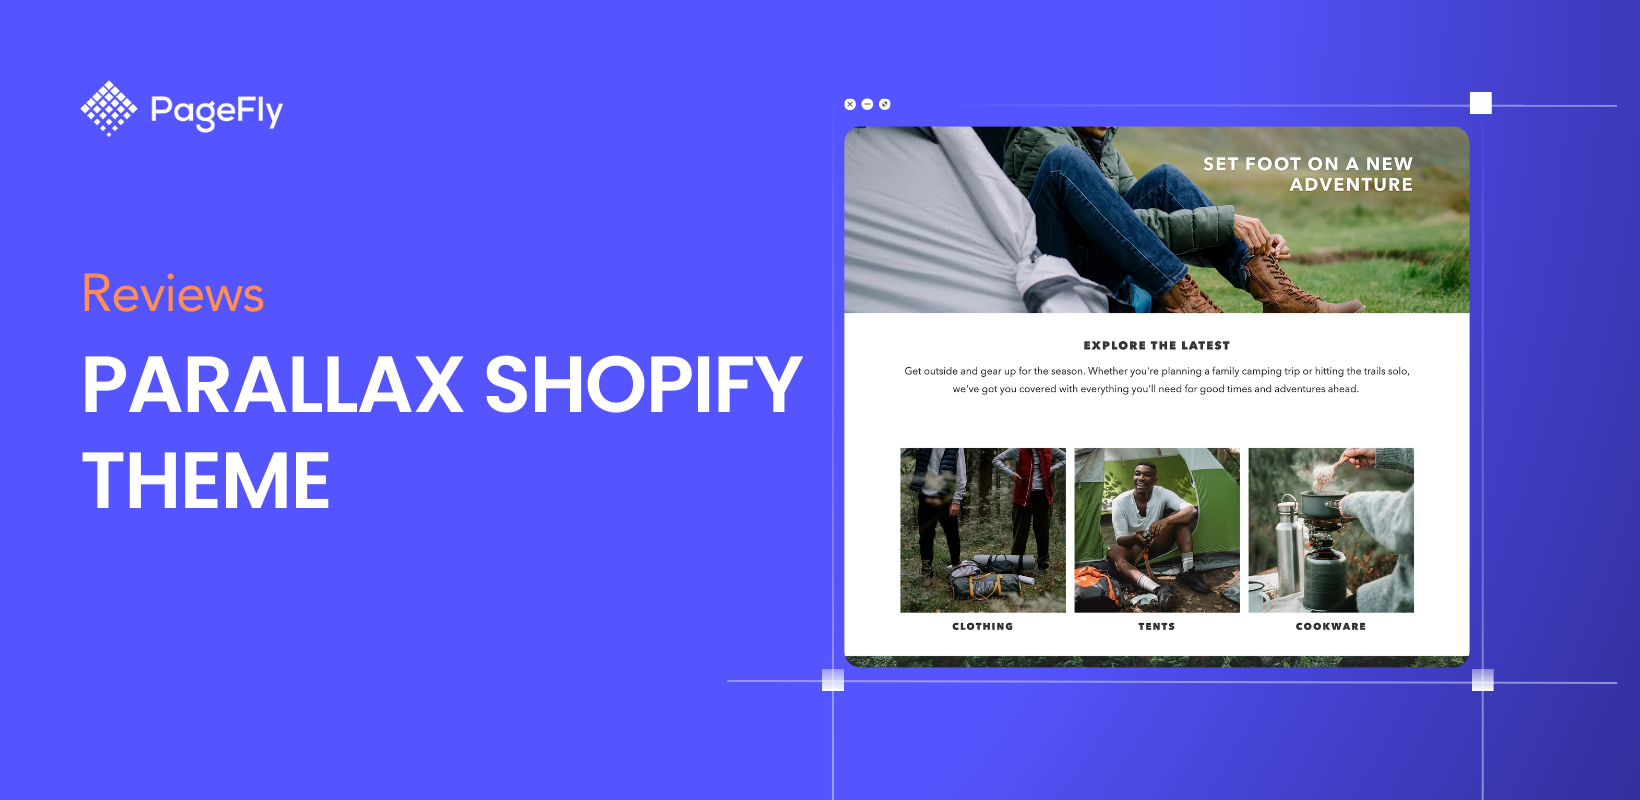 Parallax Shopify Theme Review: Can You Build A Visually-Striking Store?